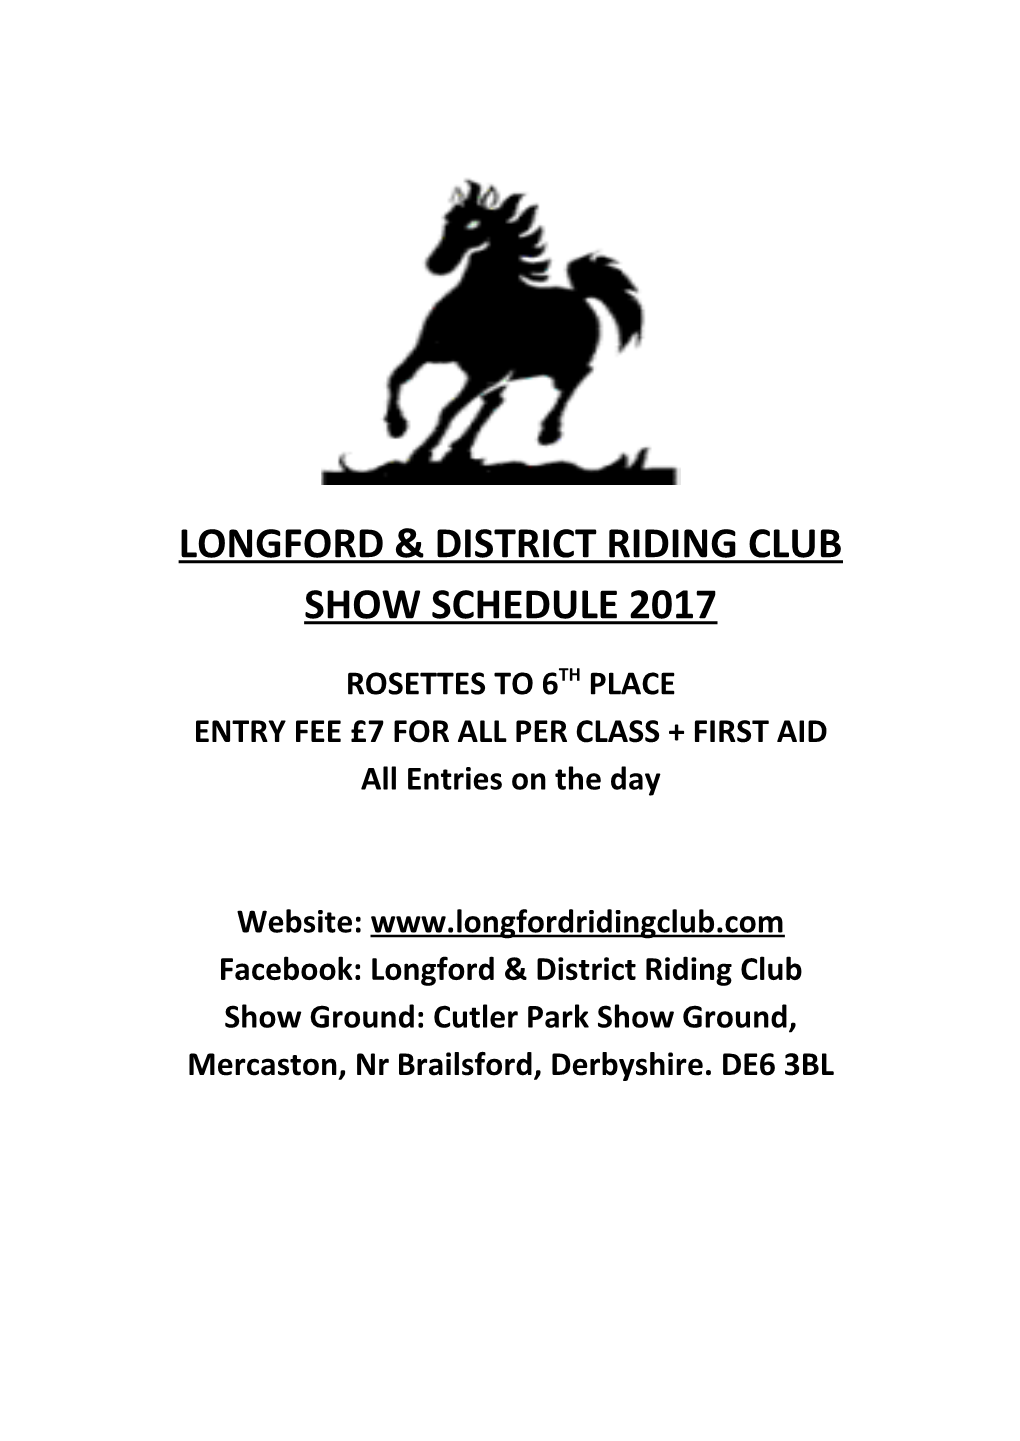 Longford & District Riding Club Show Schedule 2017